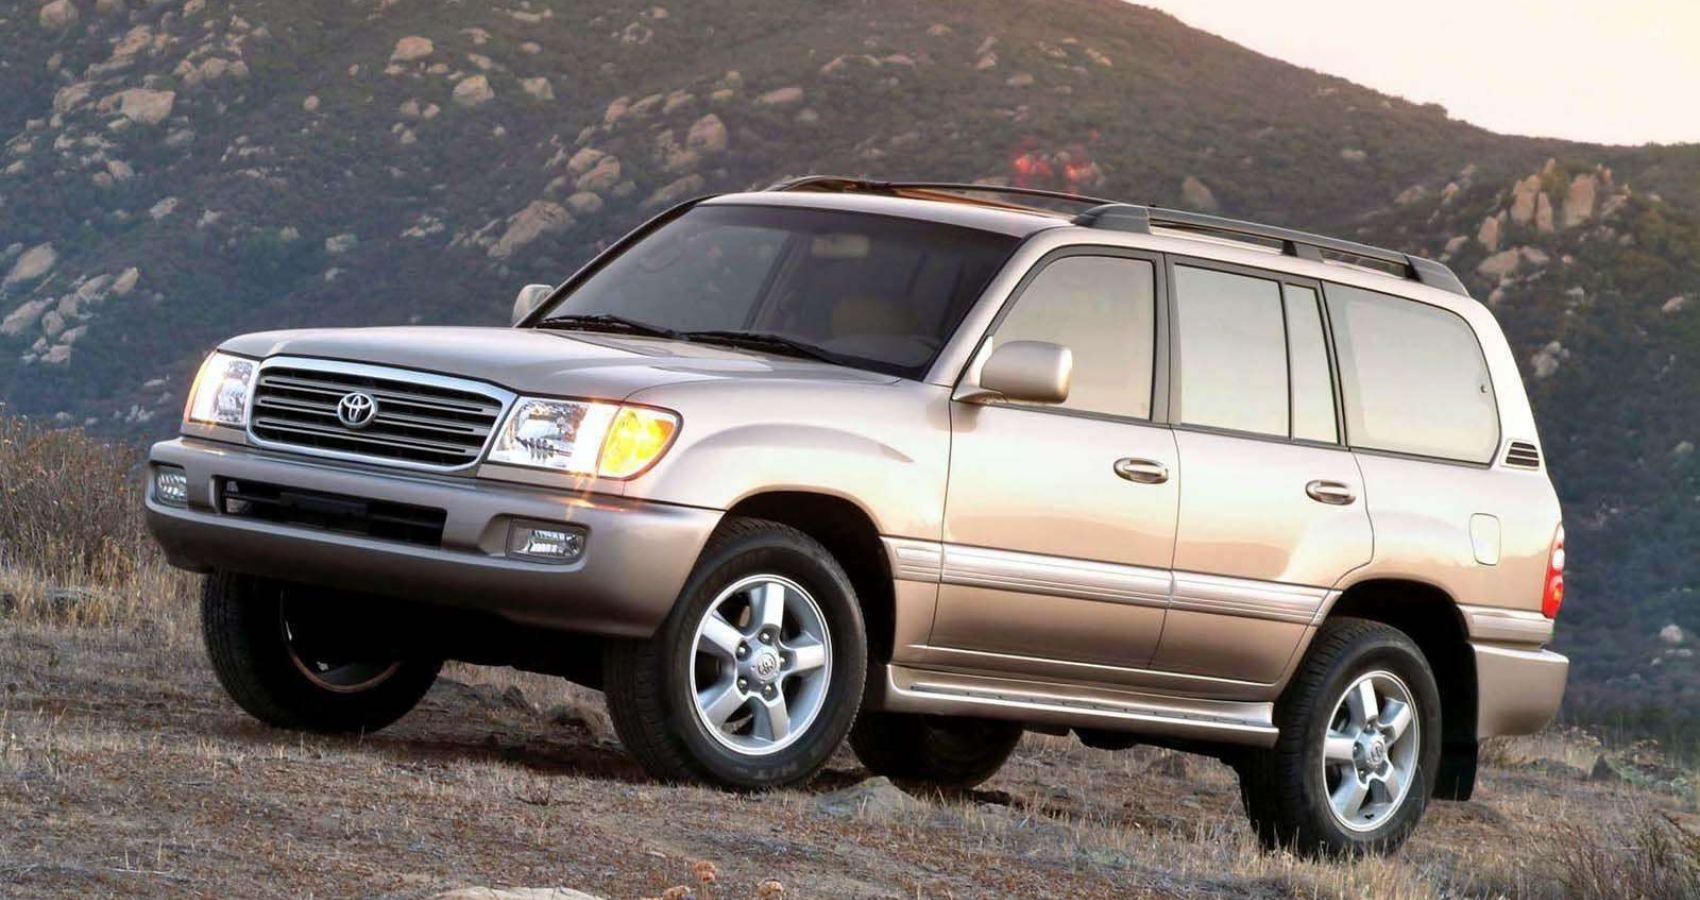 2003 Toyota Land Cruiser 100 Series Front Profile Featured